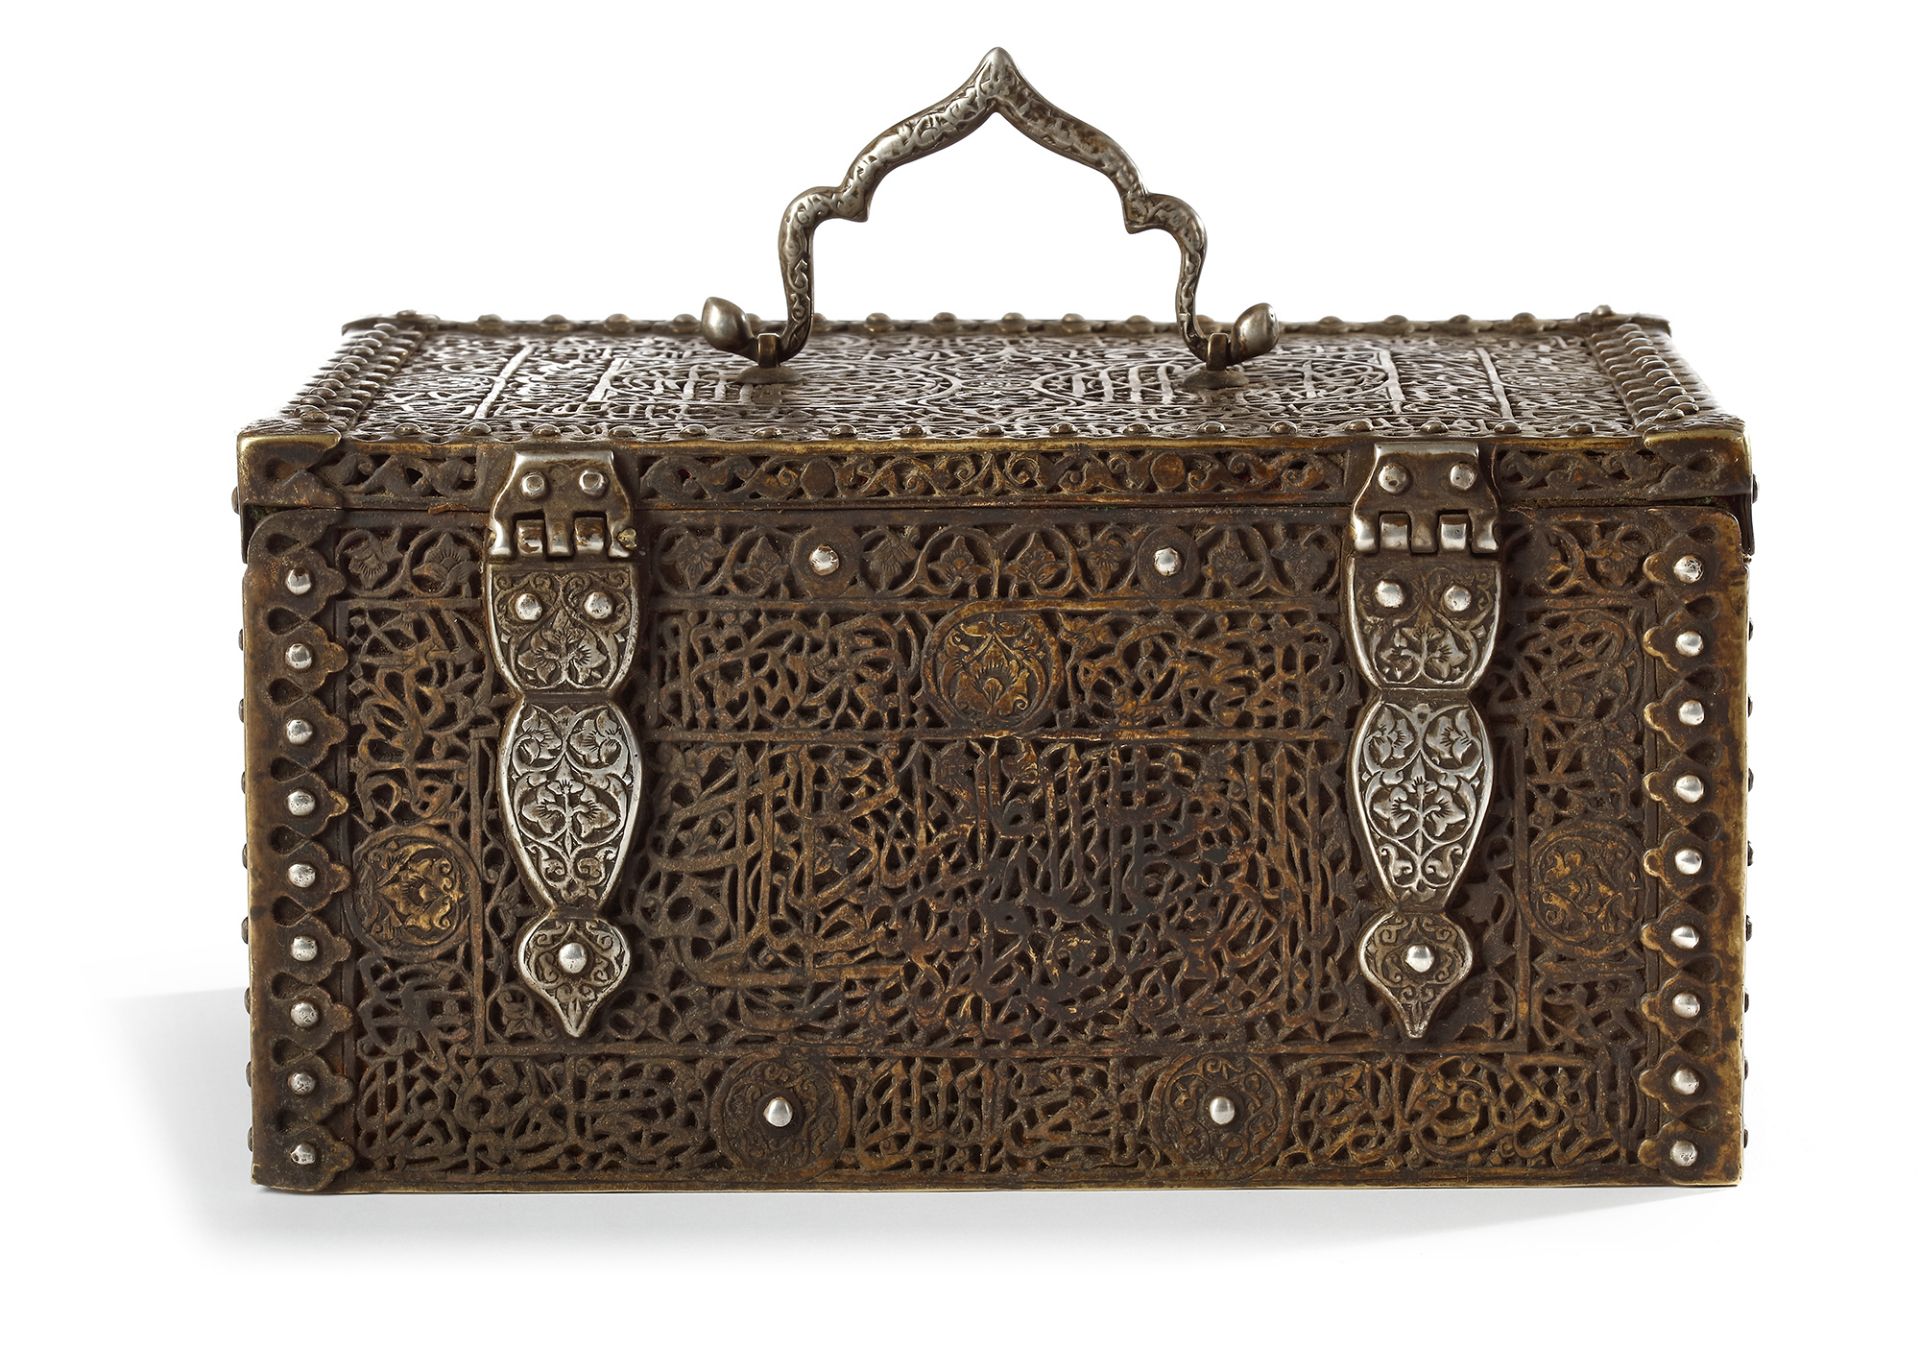 A SAFAVID BRASS JEWELRY BOX, PERSIA, DATED 952 AH/1545 AD - Image 10 of 14